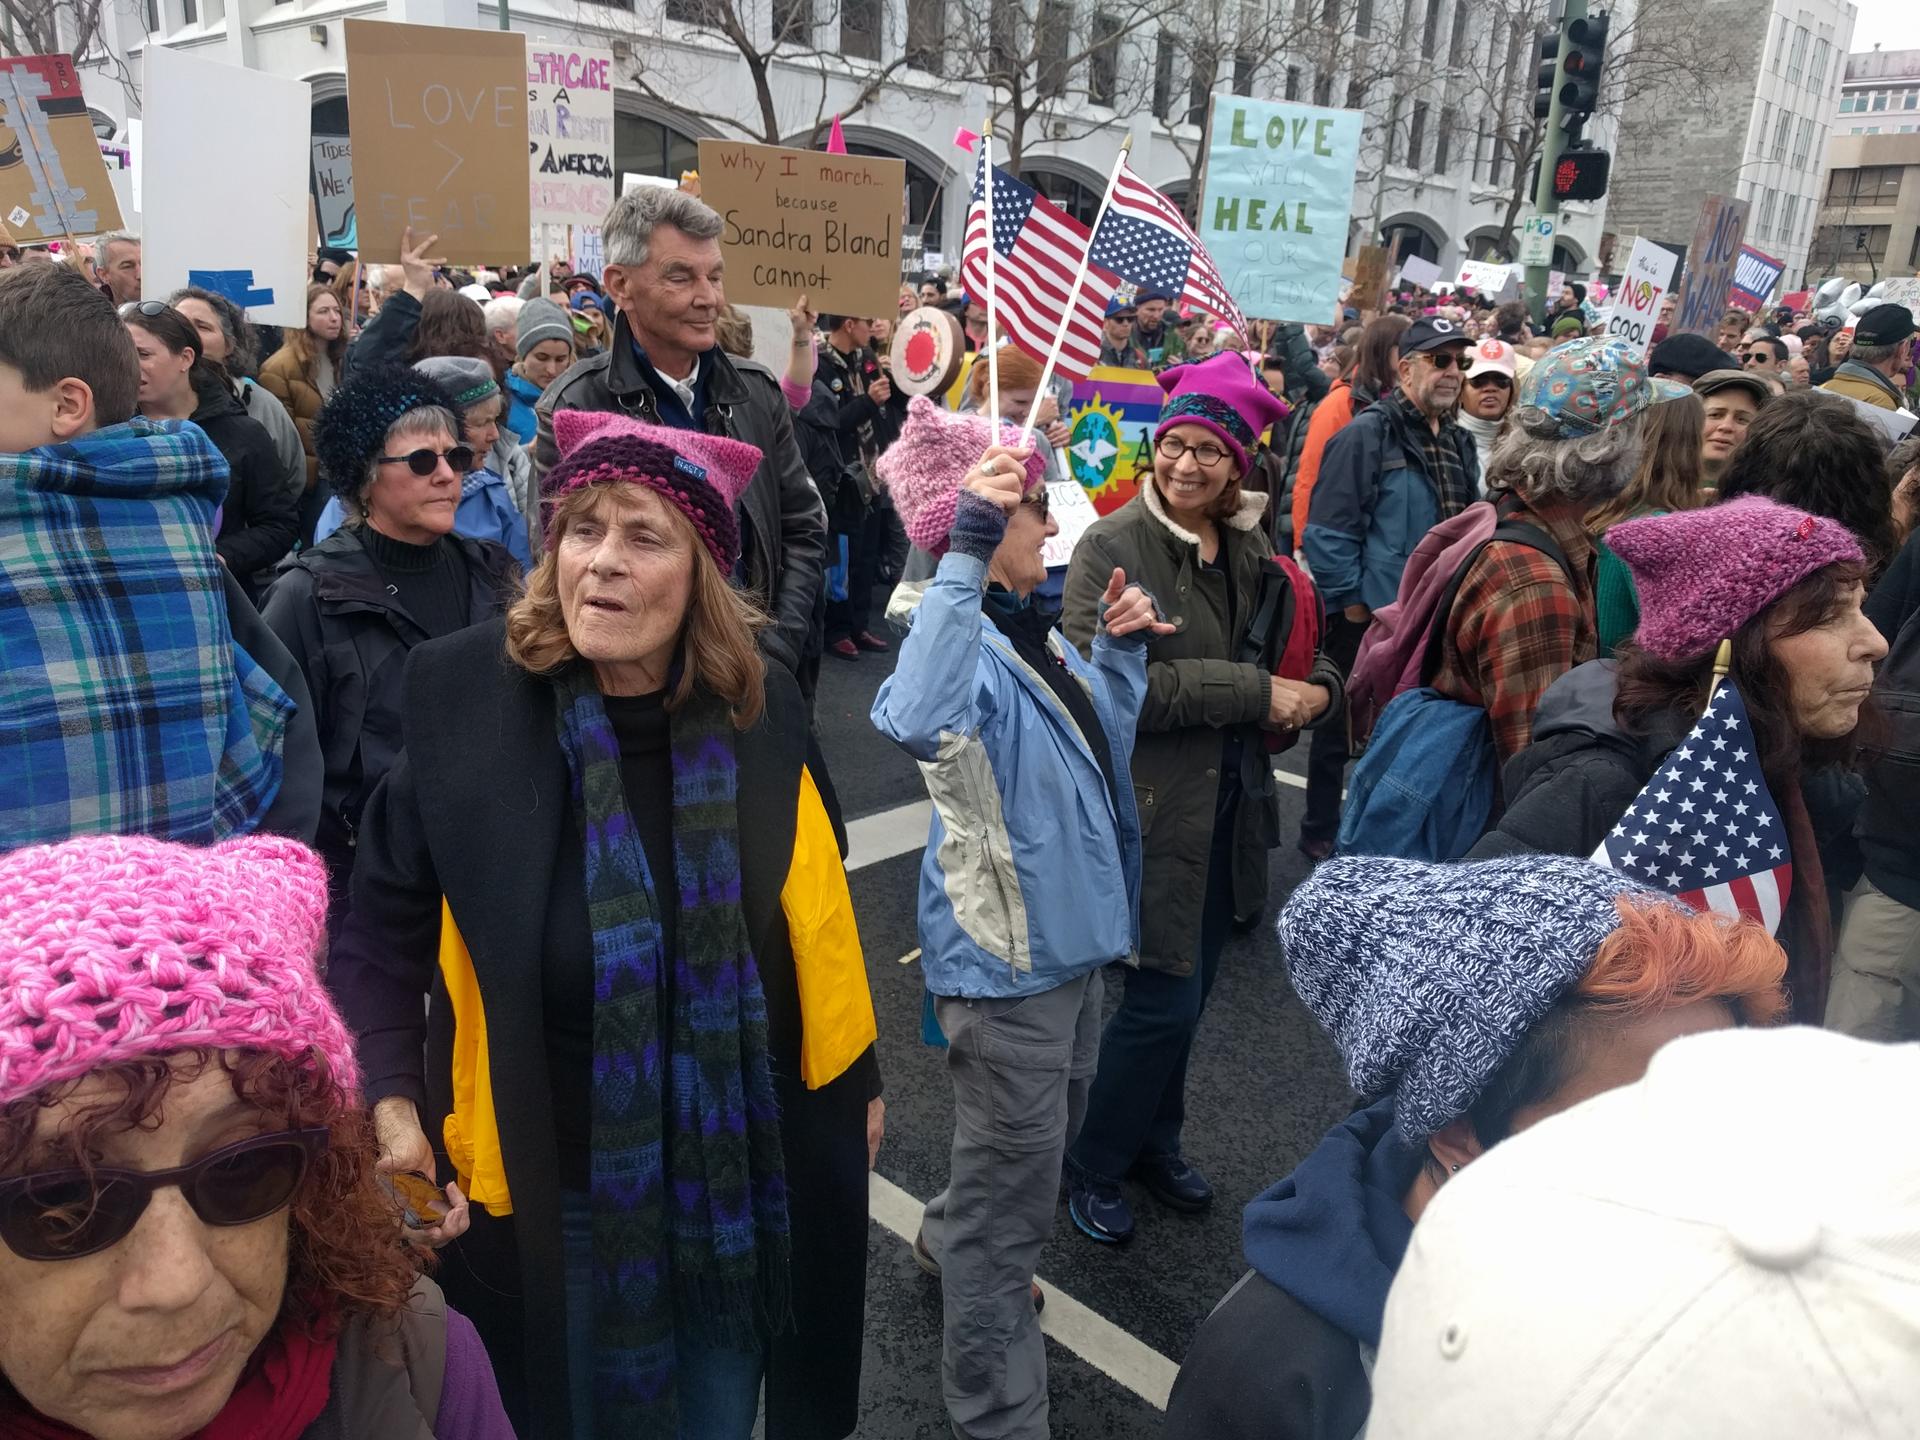 Women's March in Oakland, CA on 1-21-17  drew more than 60,000 people